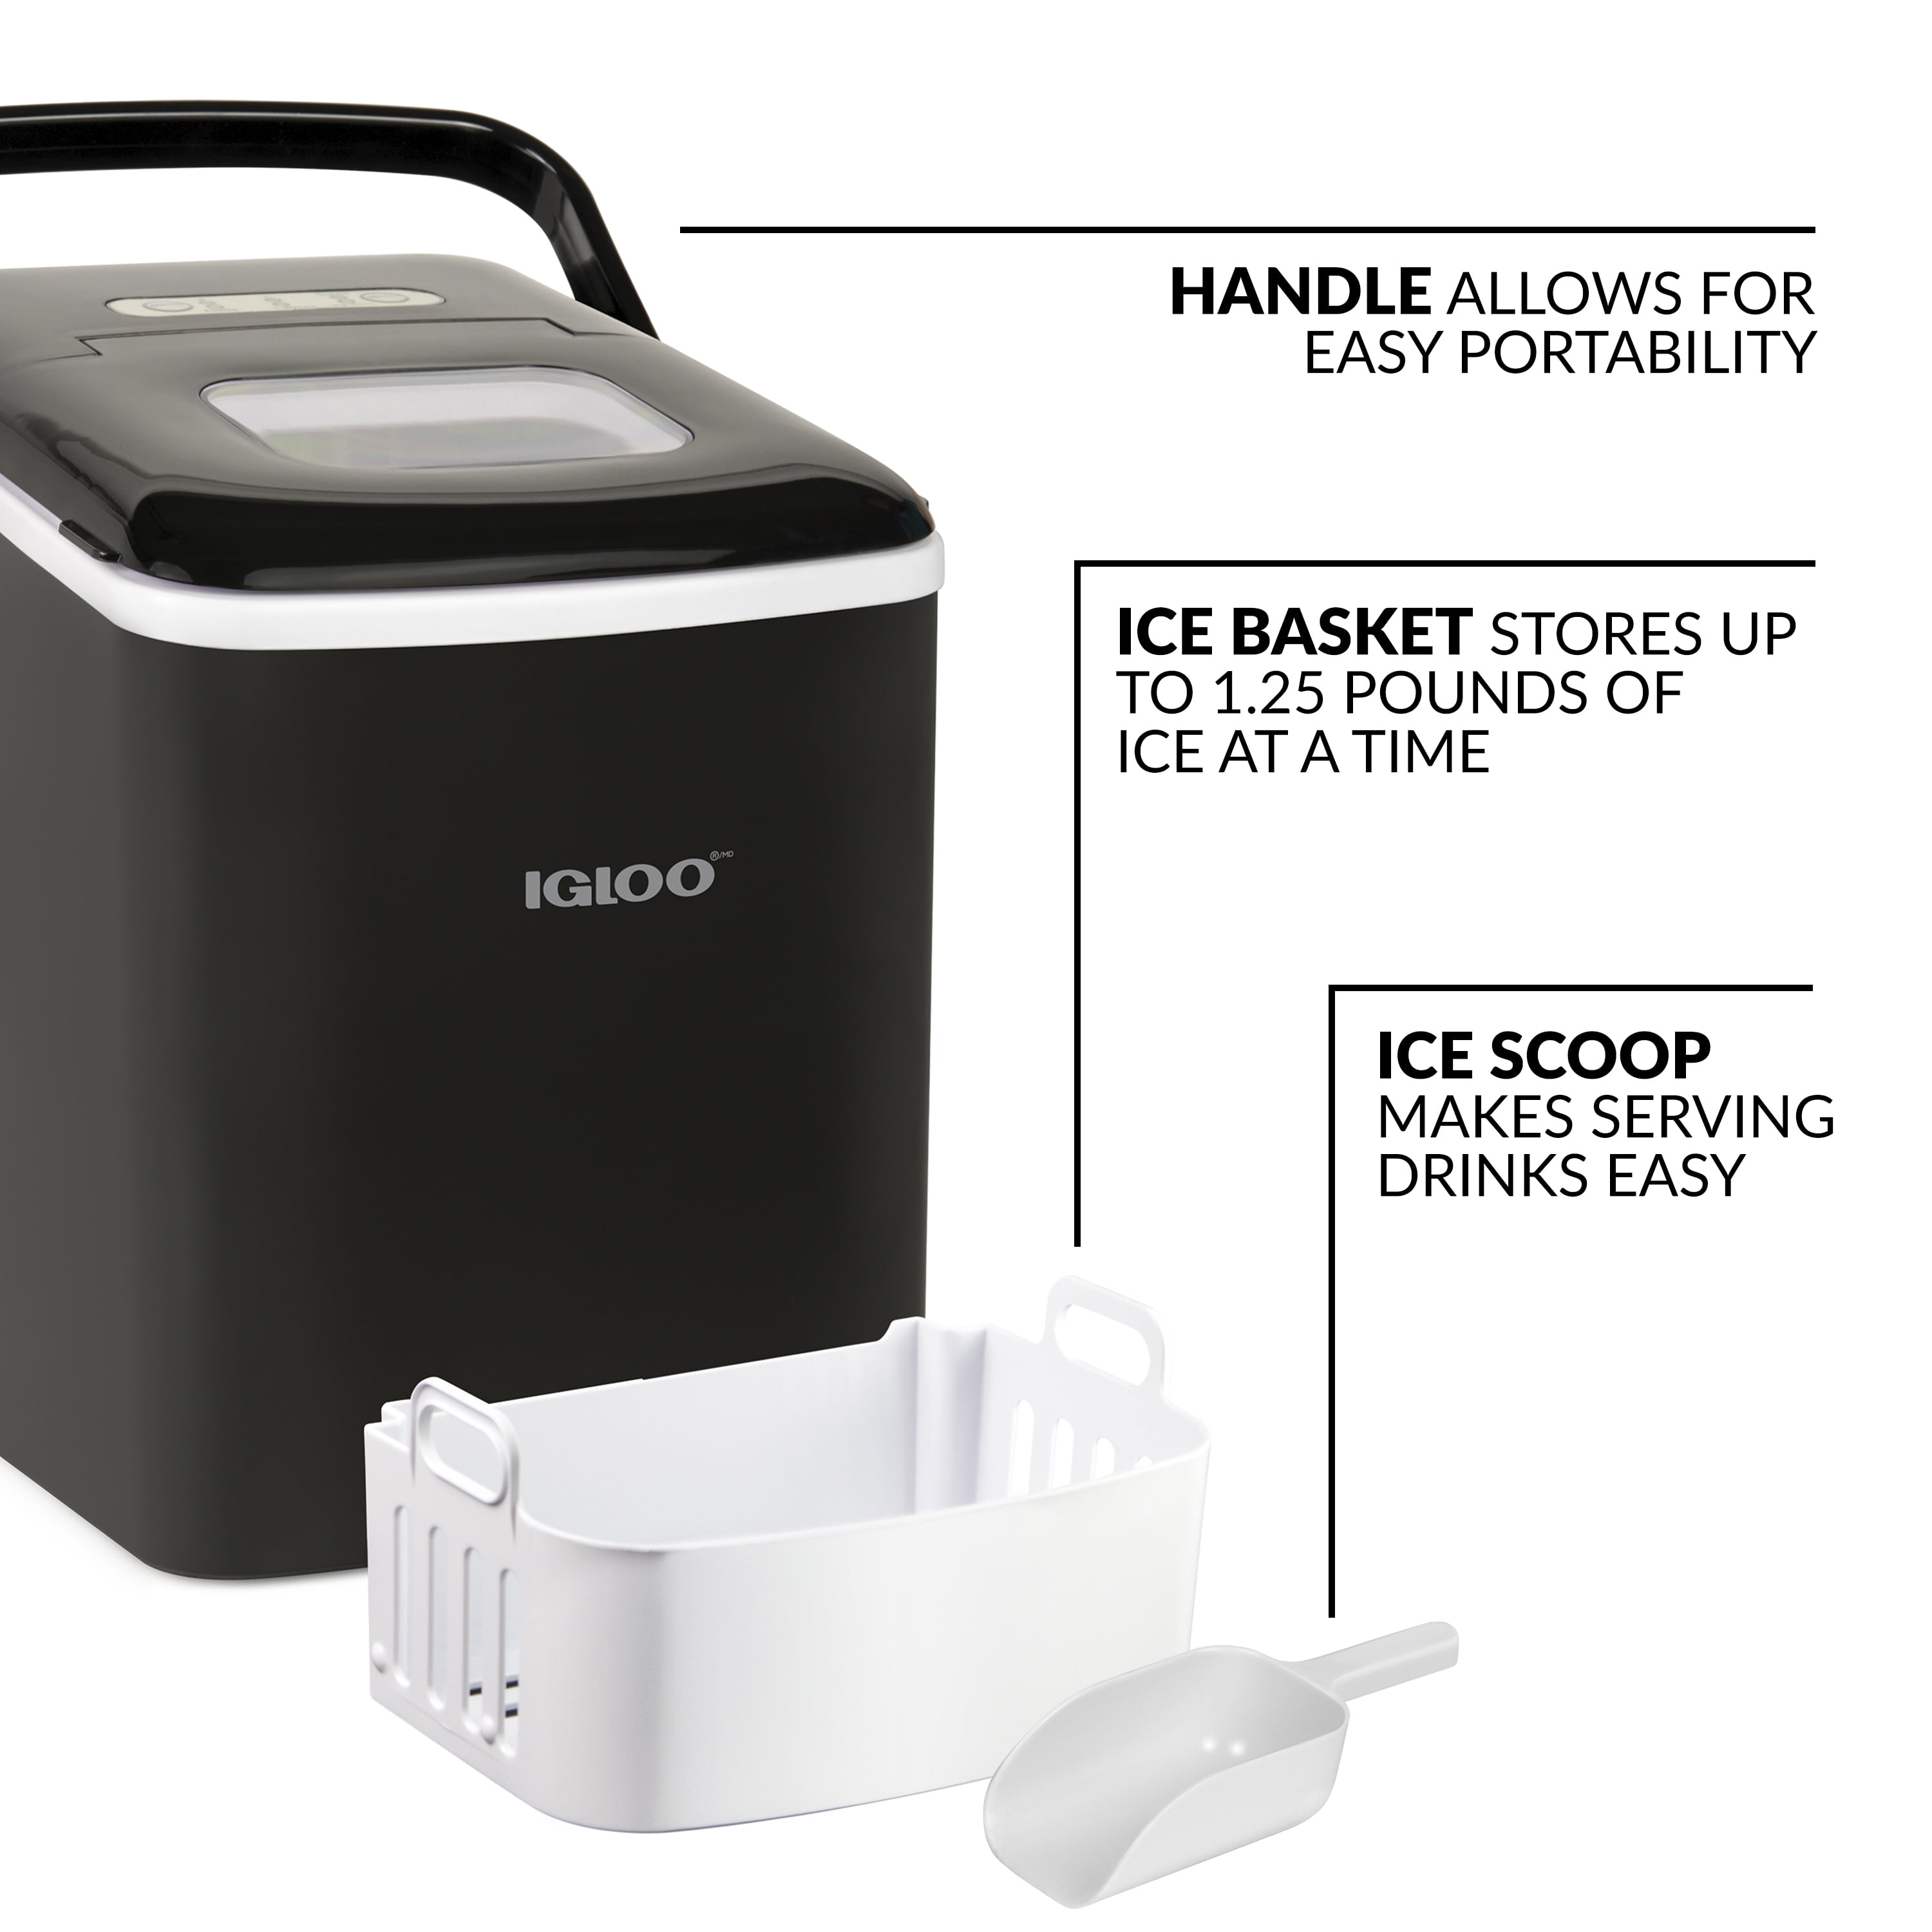 Igloo IGLICEB26HNBK 26-Pound Automatic Self-Cleaning Portable